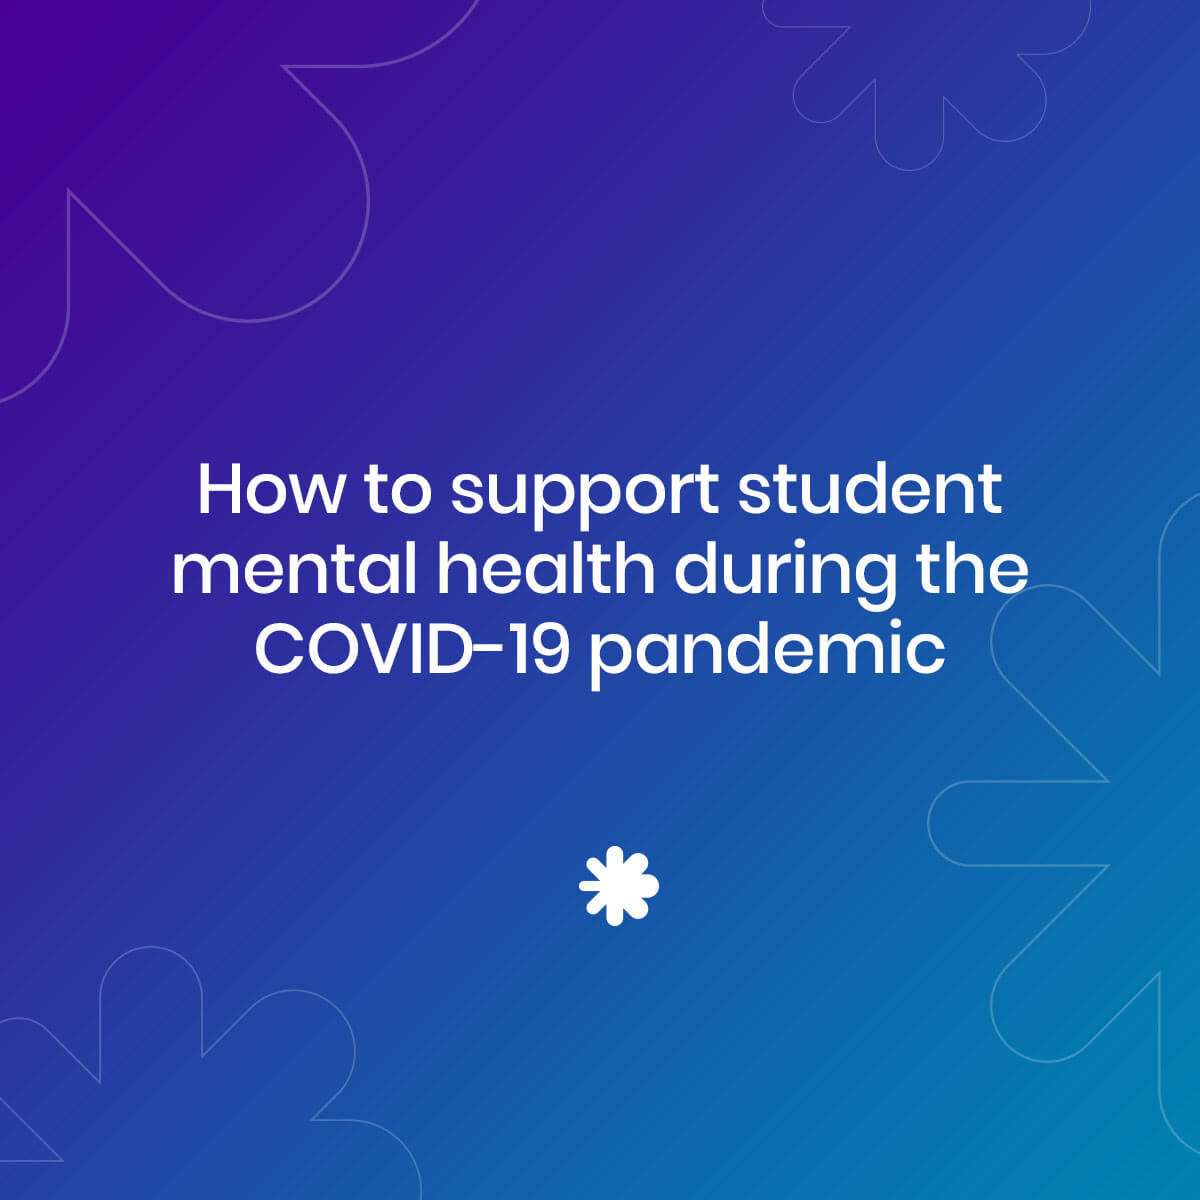 How to support student mental health during the COVID-19 pandemic